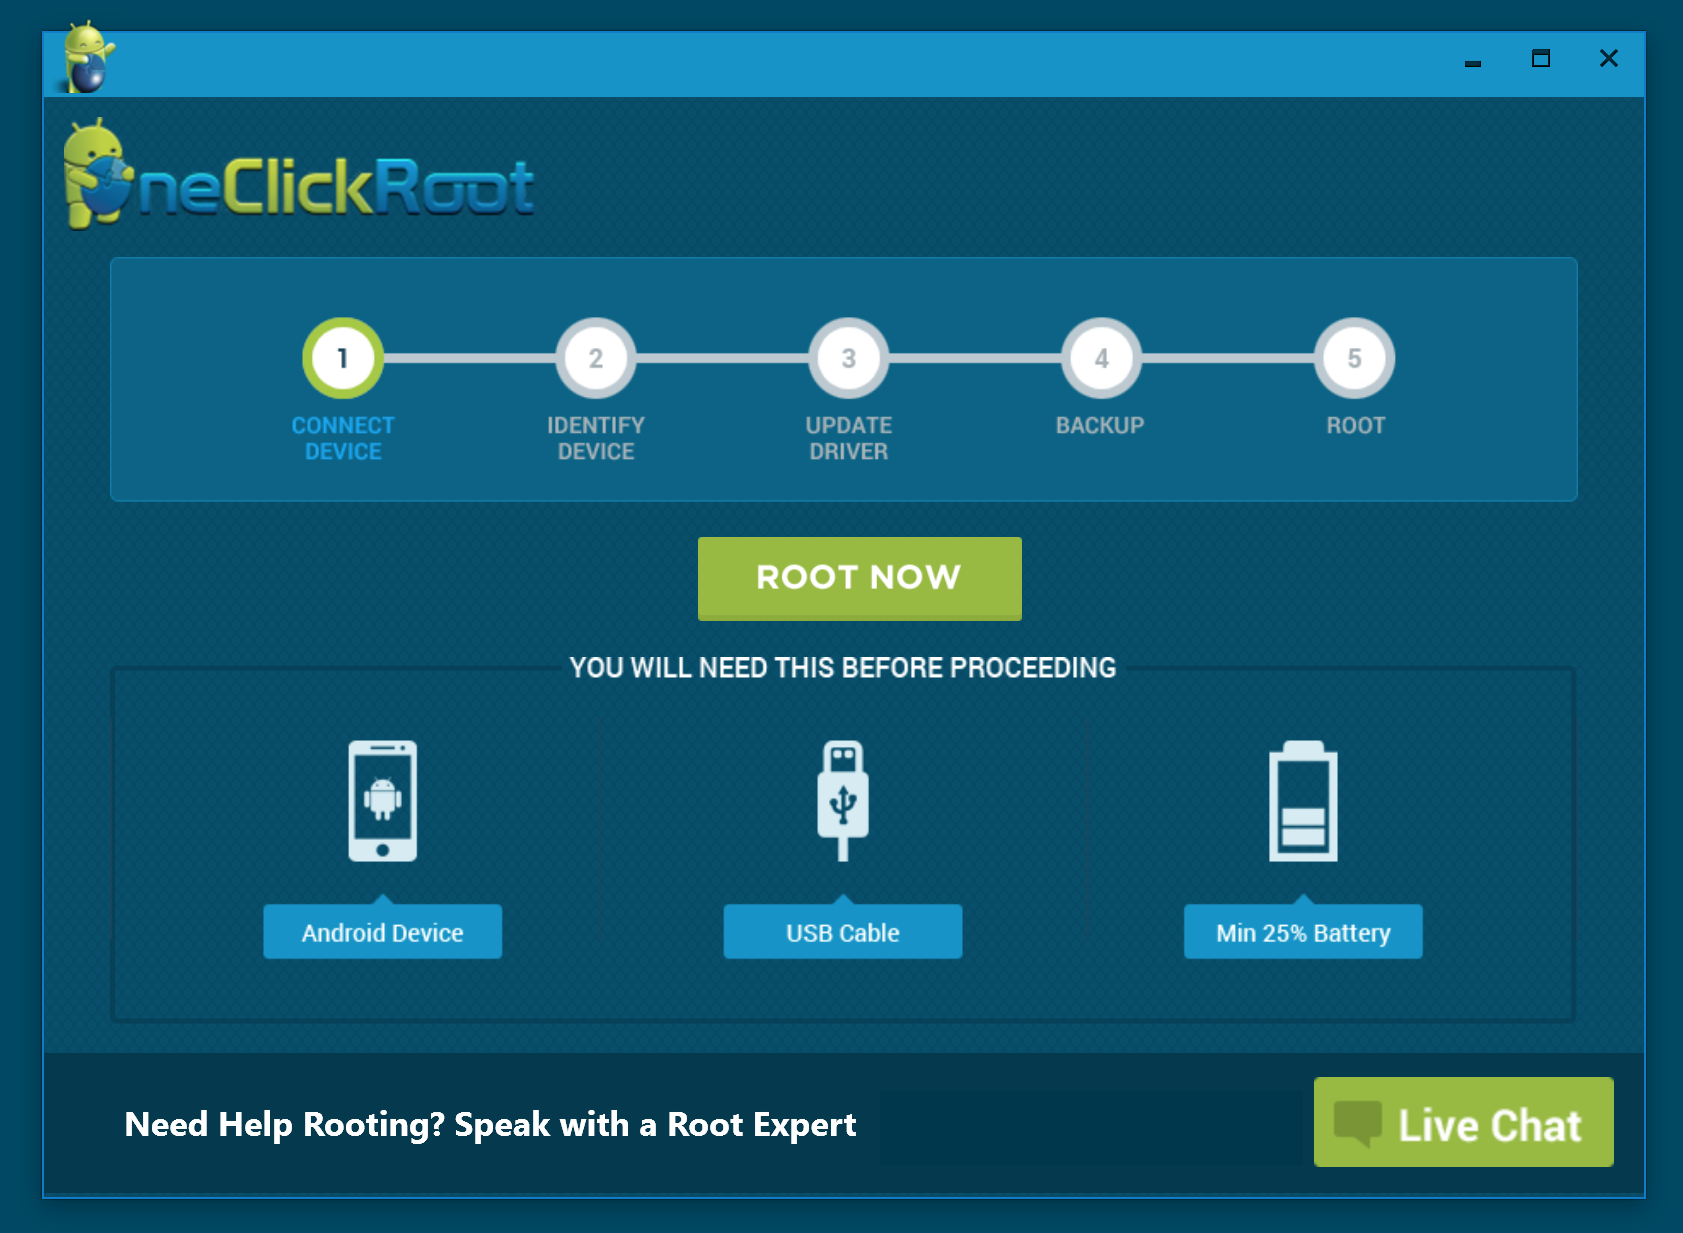 One click root windows download